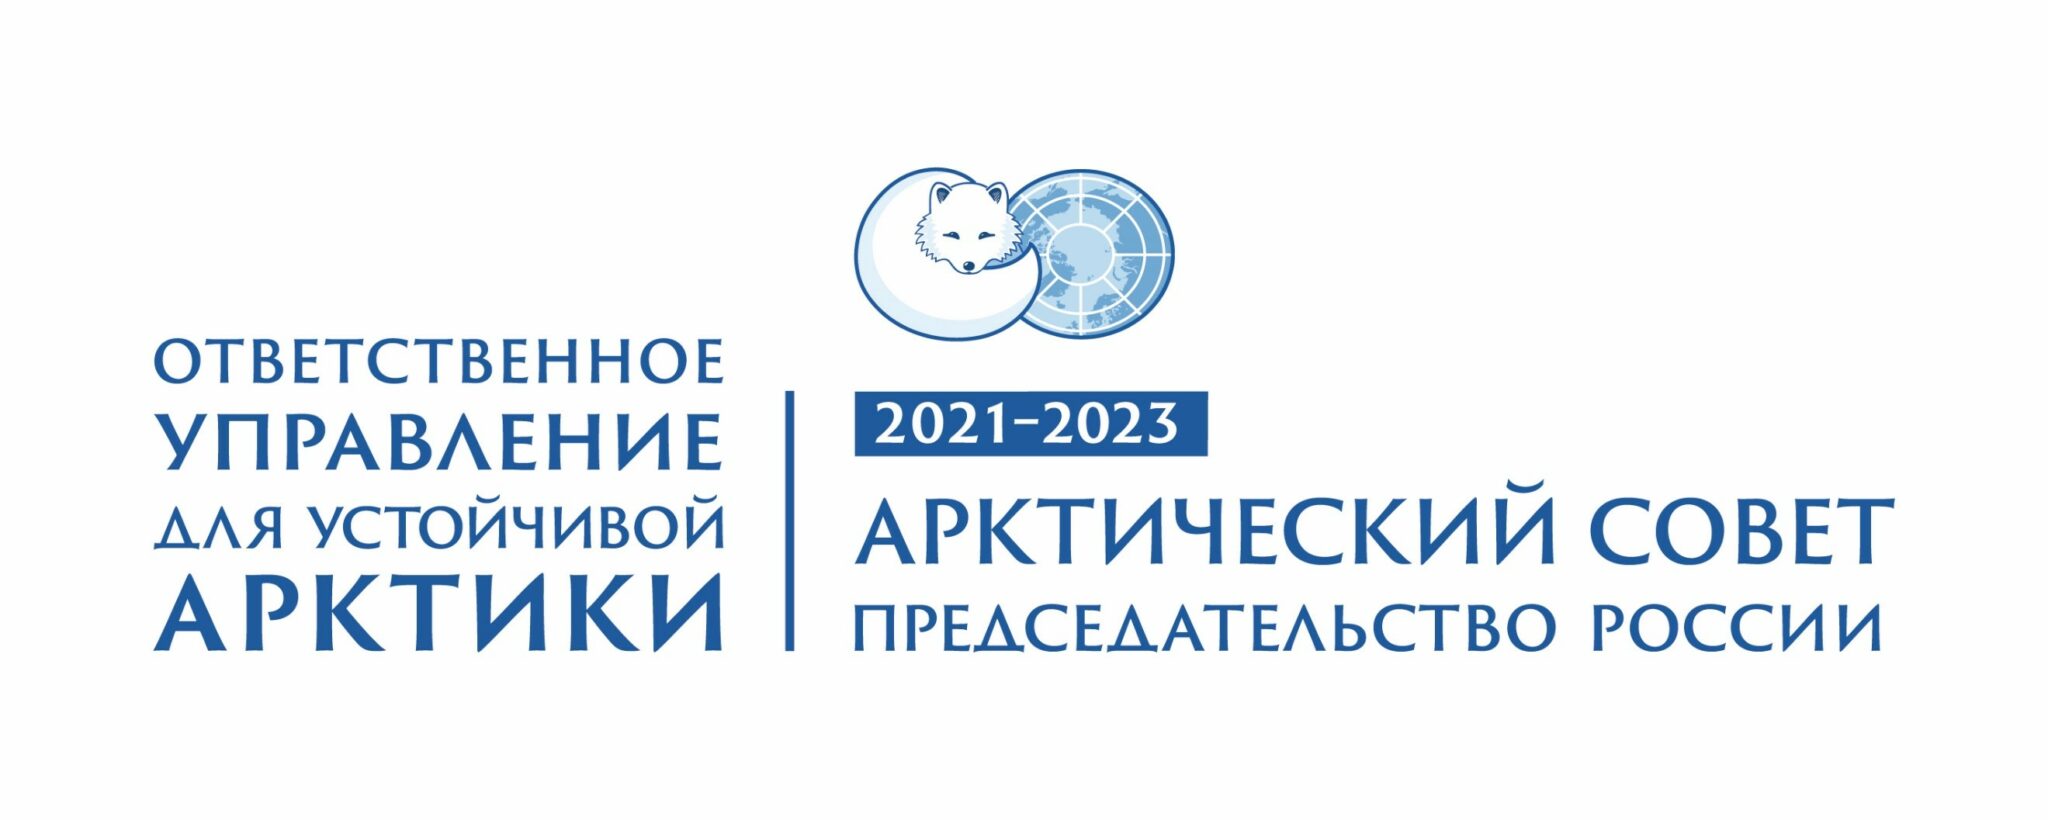 arctic council off logo scaled